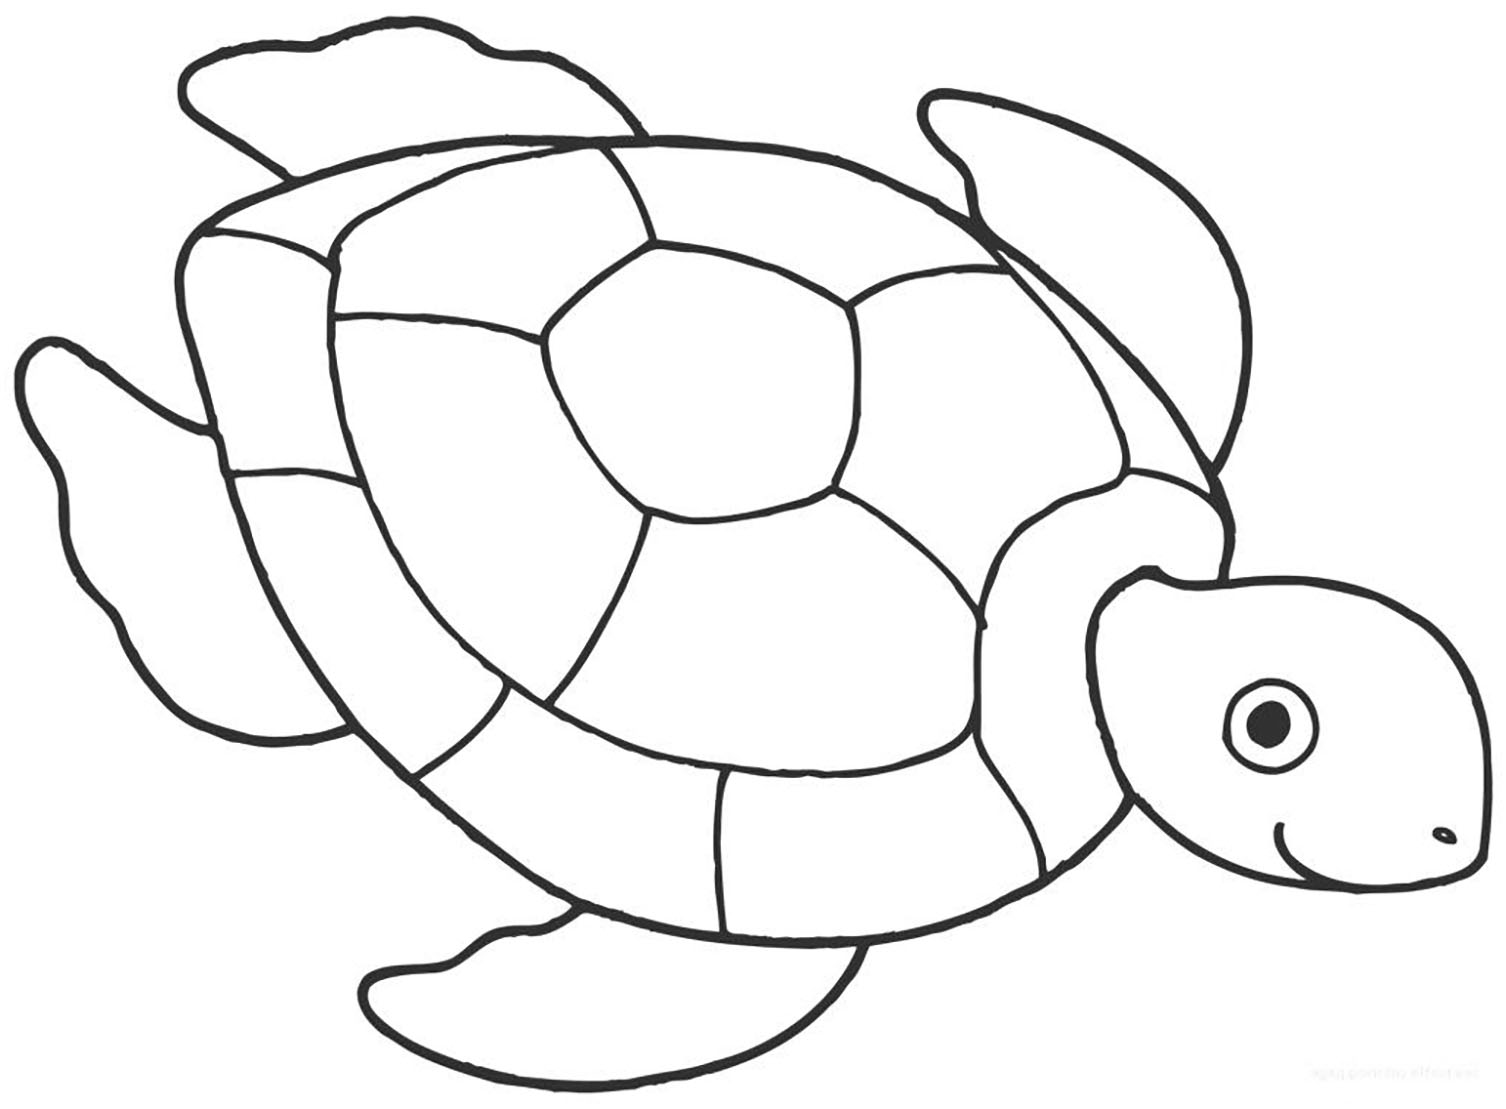 Turtles to print for free - Turtles Kids Coloring Pages